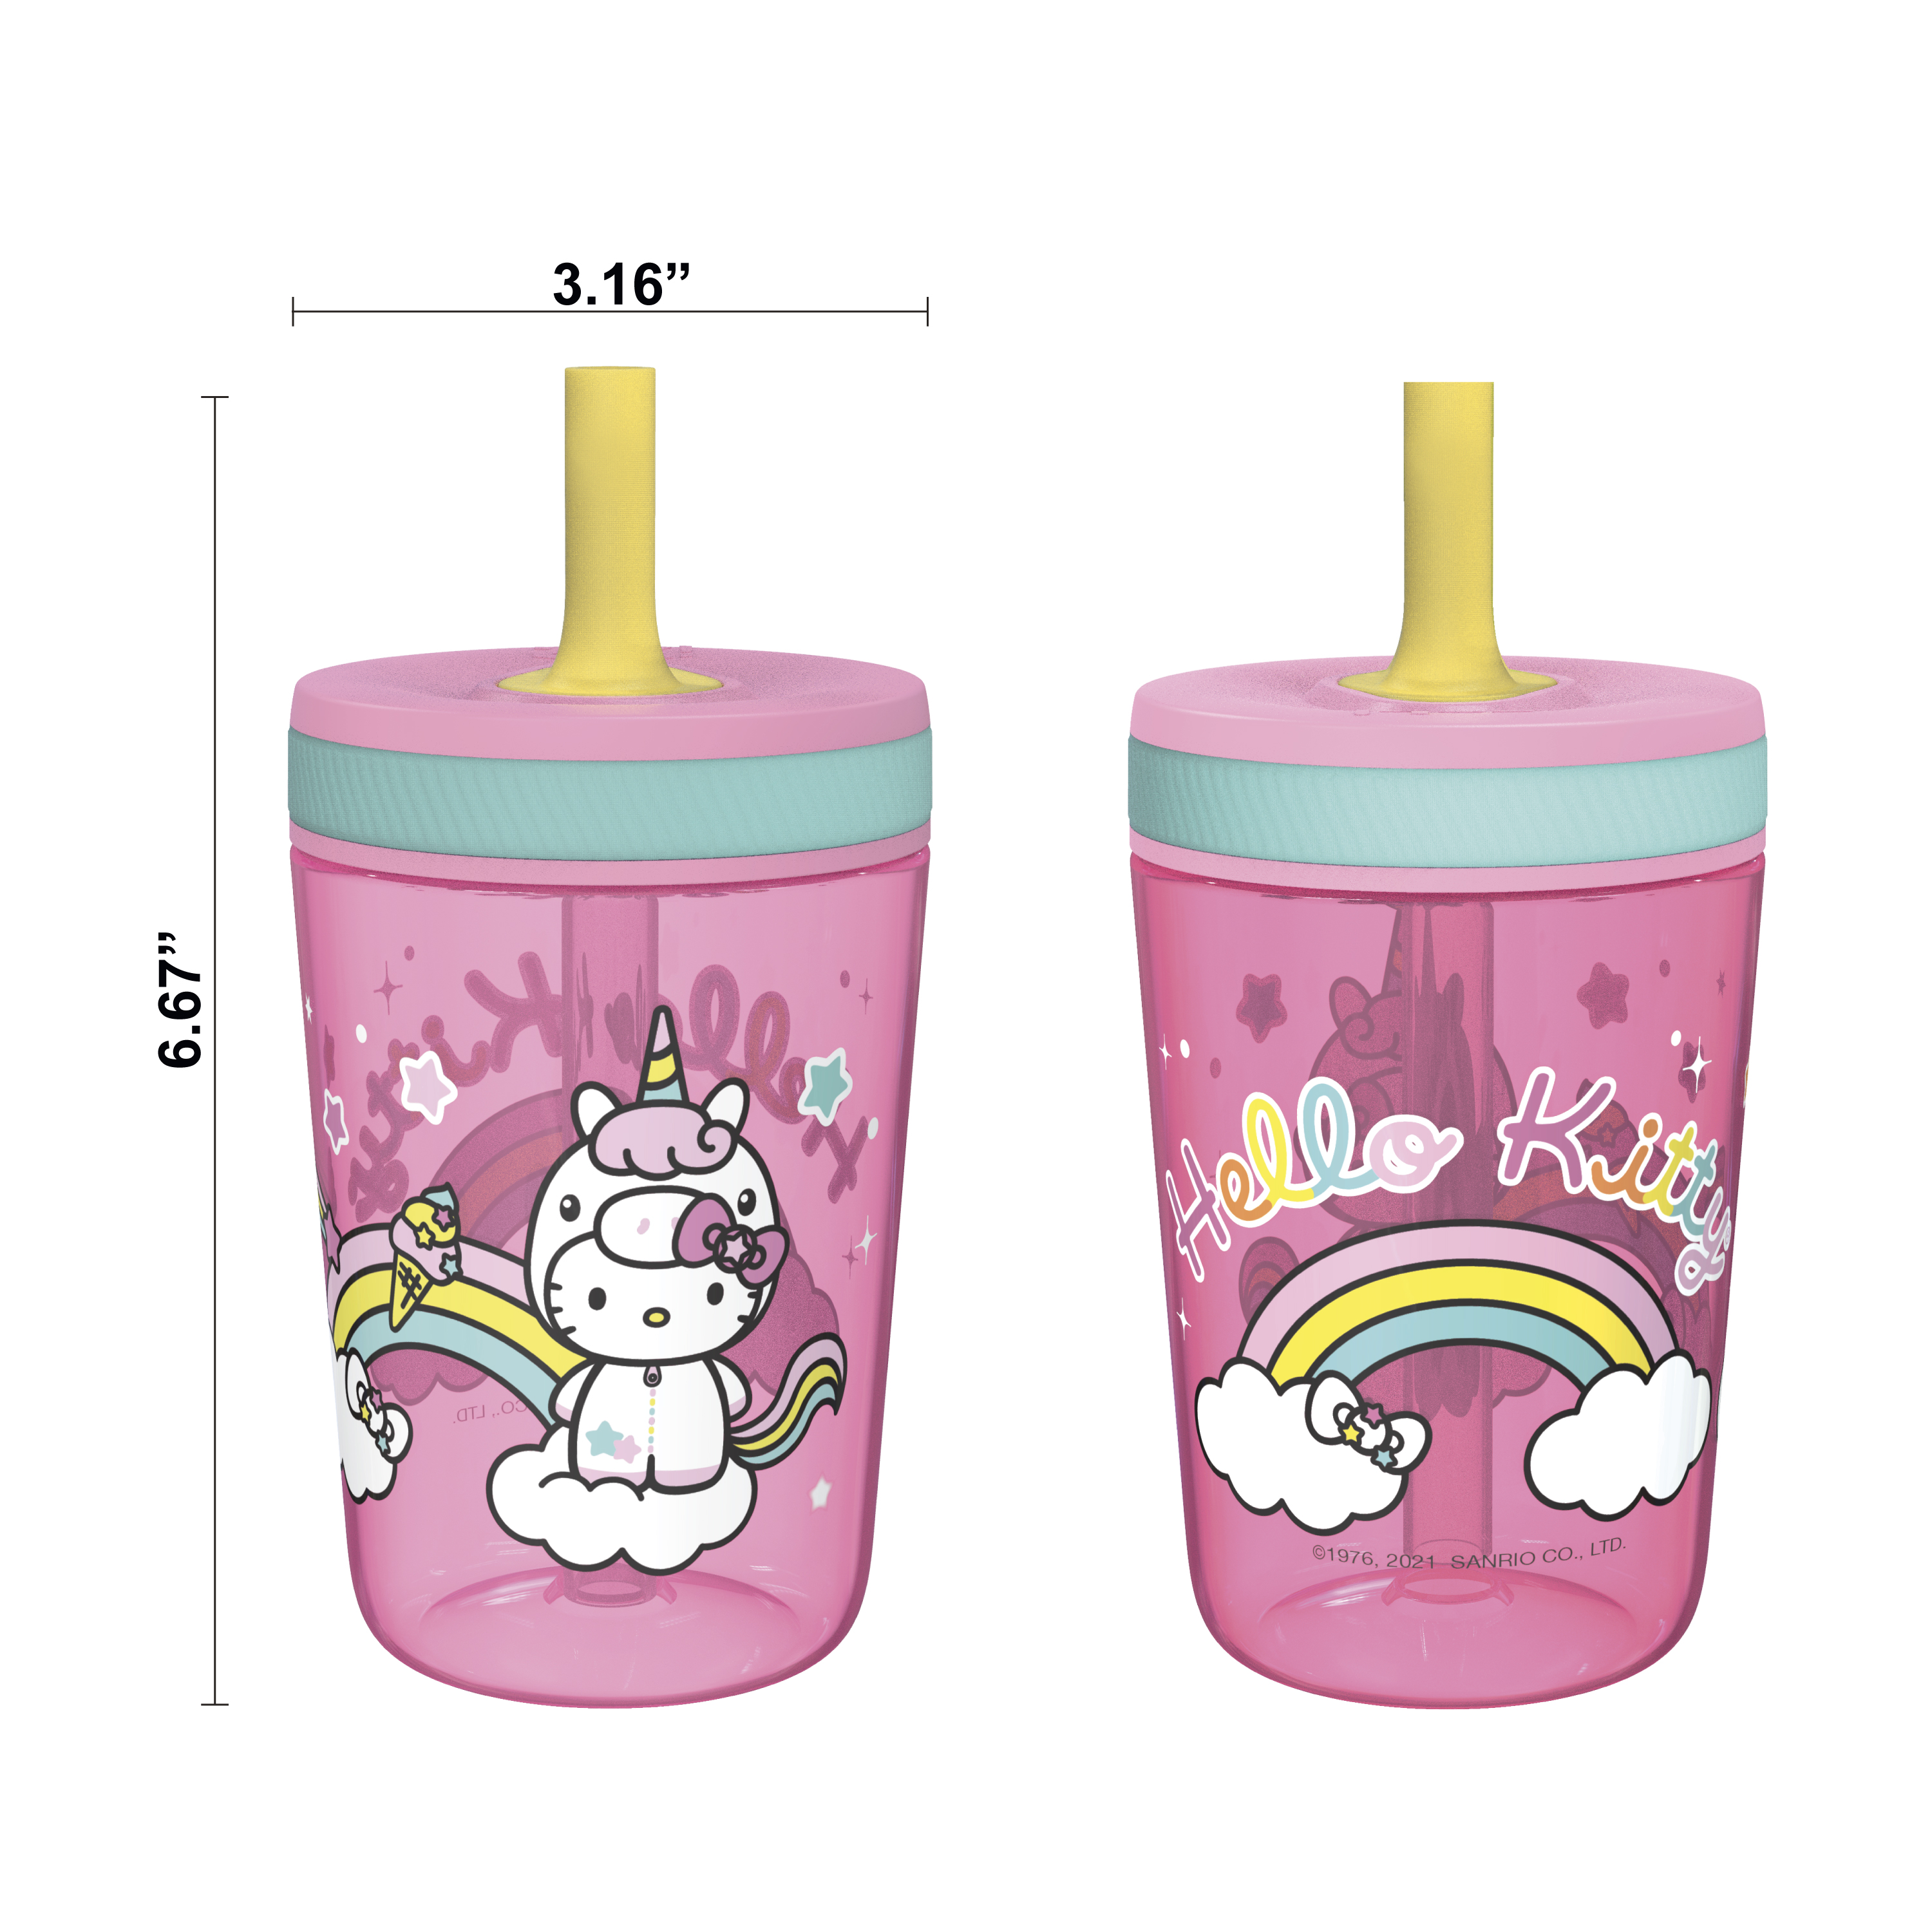 Sanrio 15  ounce Plastic Tumbler with Lid and Straw, Hello Kitty, 2-piece set slideshow image 6